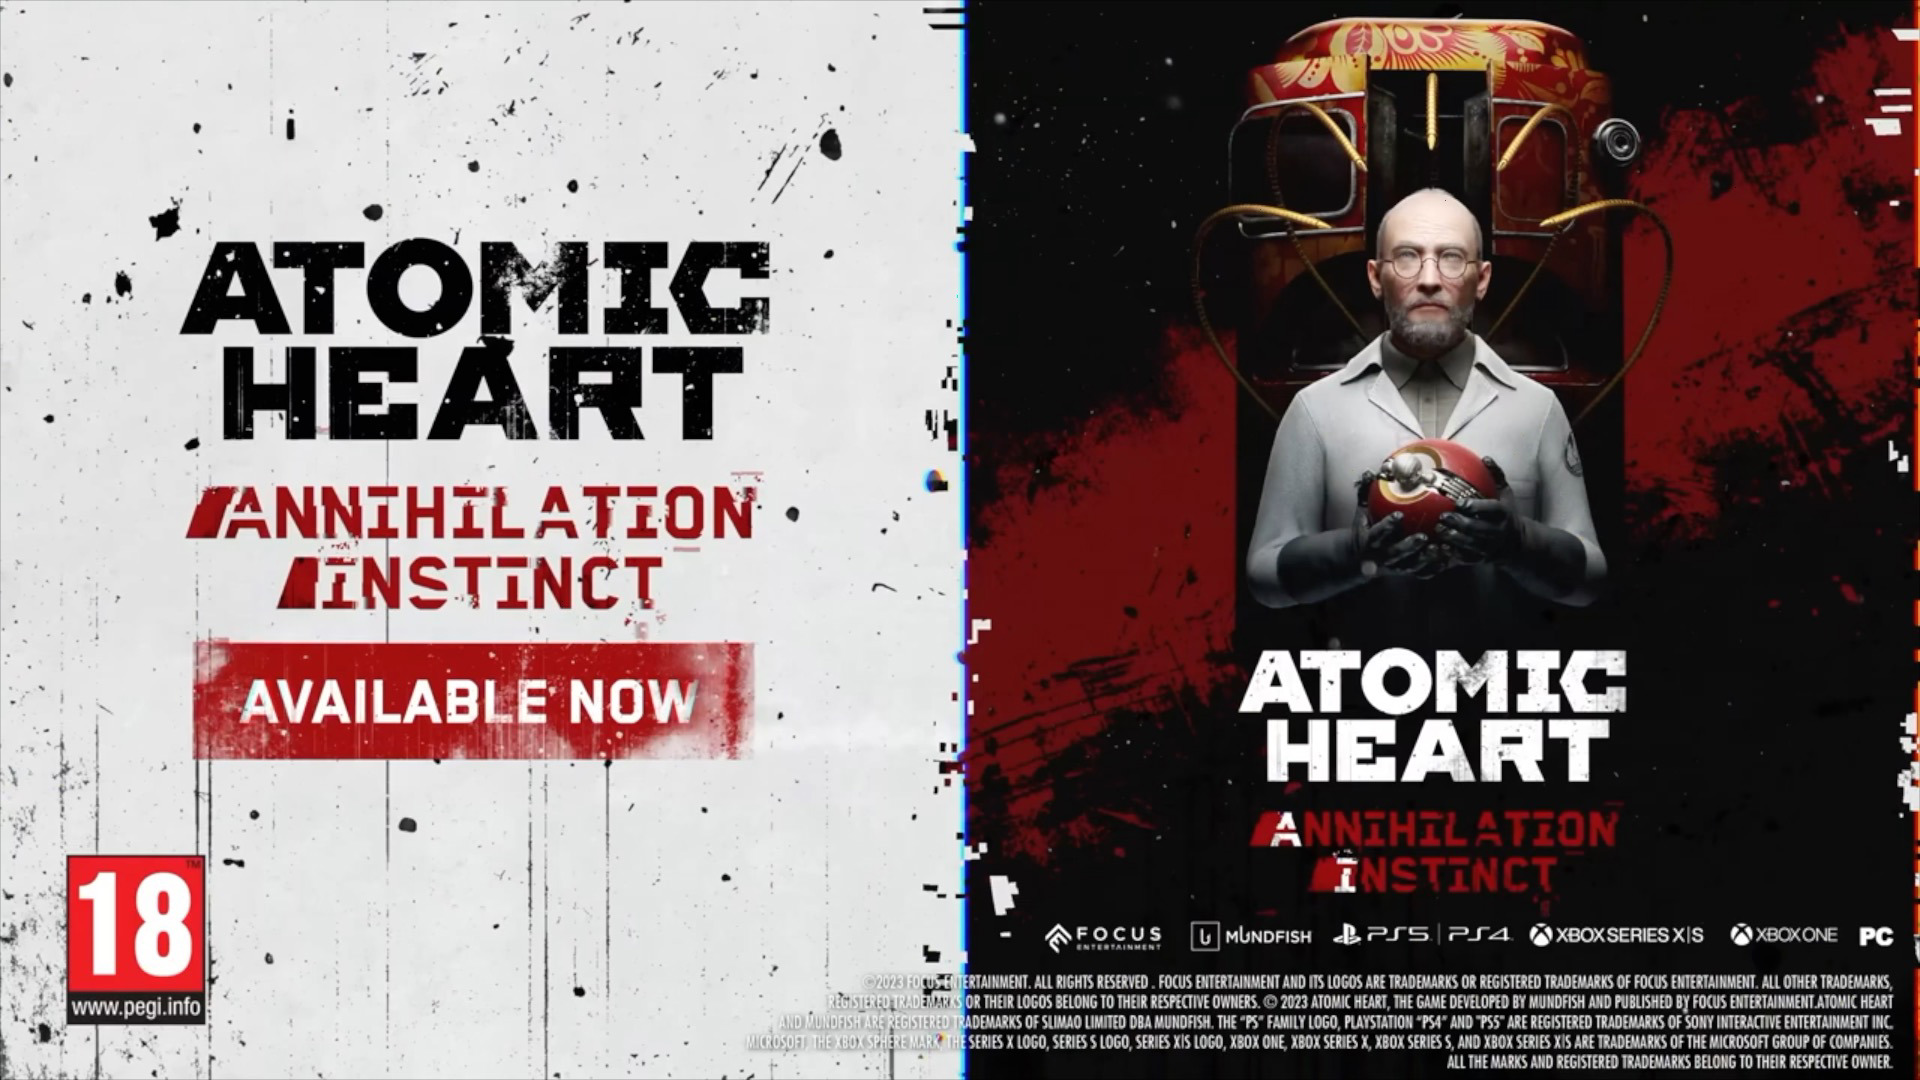 Atomic Heart: Annihilation Instinct DLC is Out Now - Atomic Heart